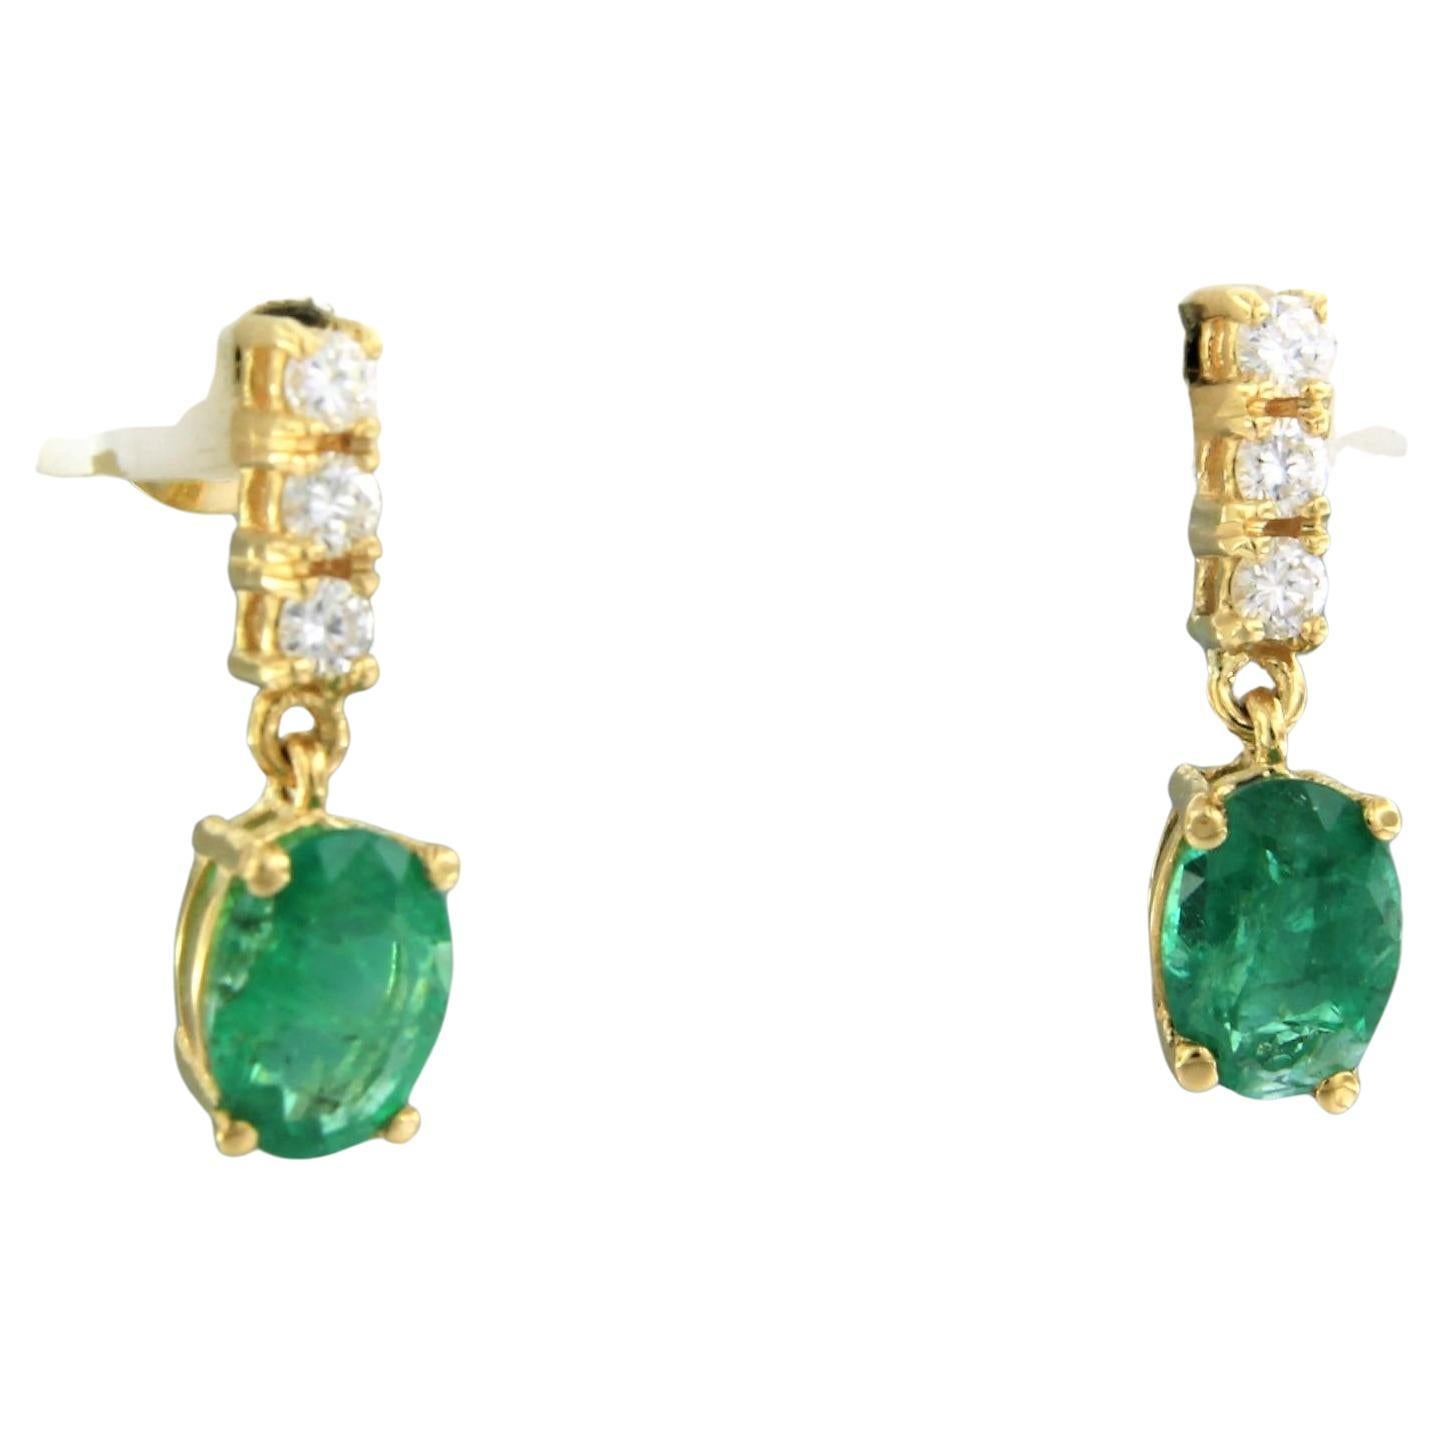 18k yellow gold earrings set with emeralds. 1.60ct and brilliant cut diamond up to. 0.24ct - F/G - VS/SI

Detailed description:

the size of the earring is 1.7 cm long by 5.0 mm wide

Total weight 2.4 grams

set with

- 2 x 7.0 mm x 5.0 mm oval